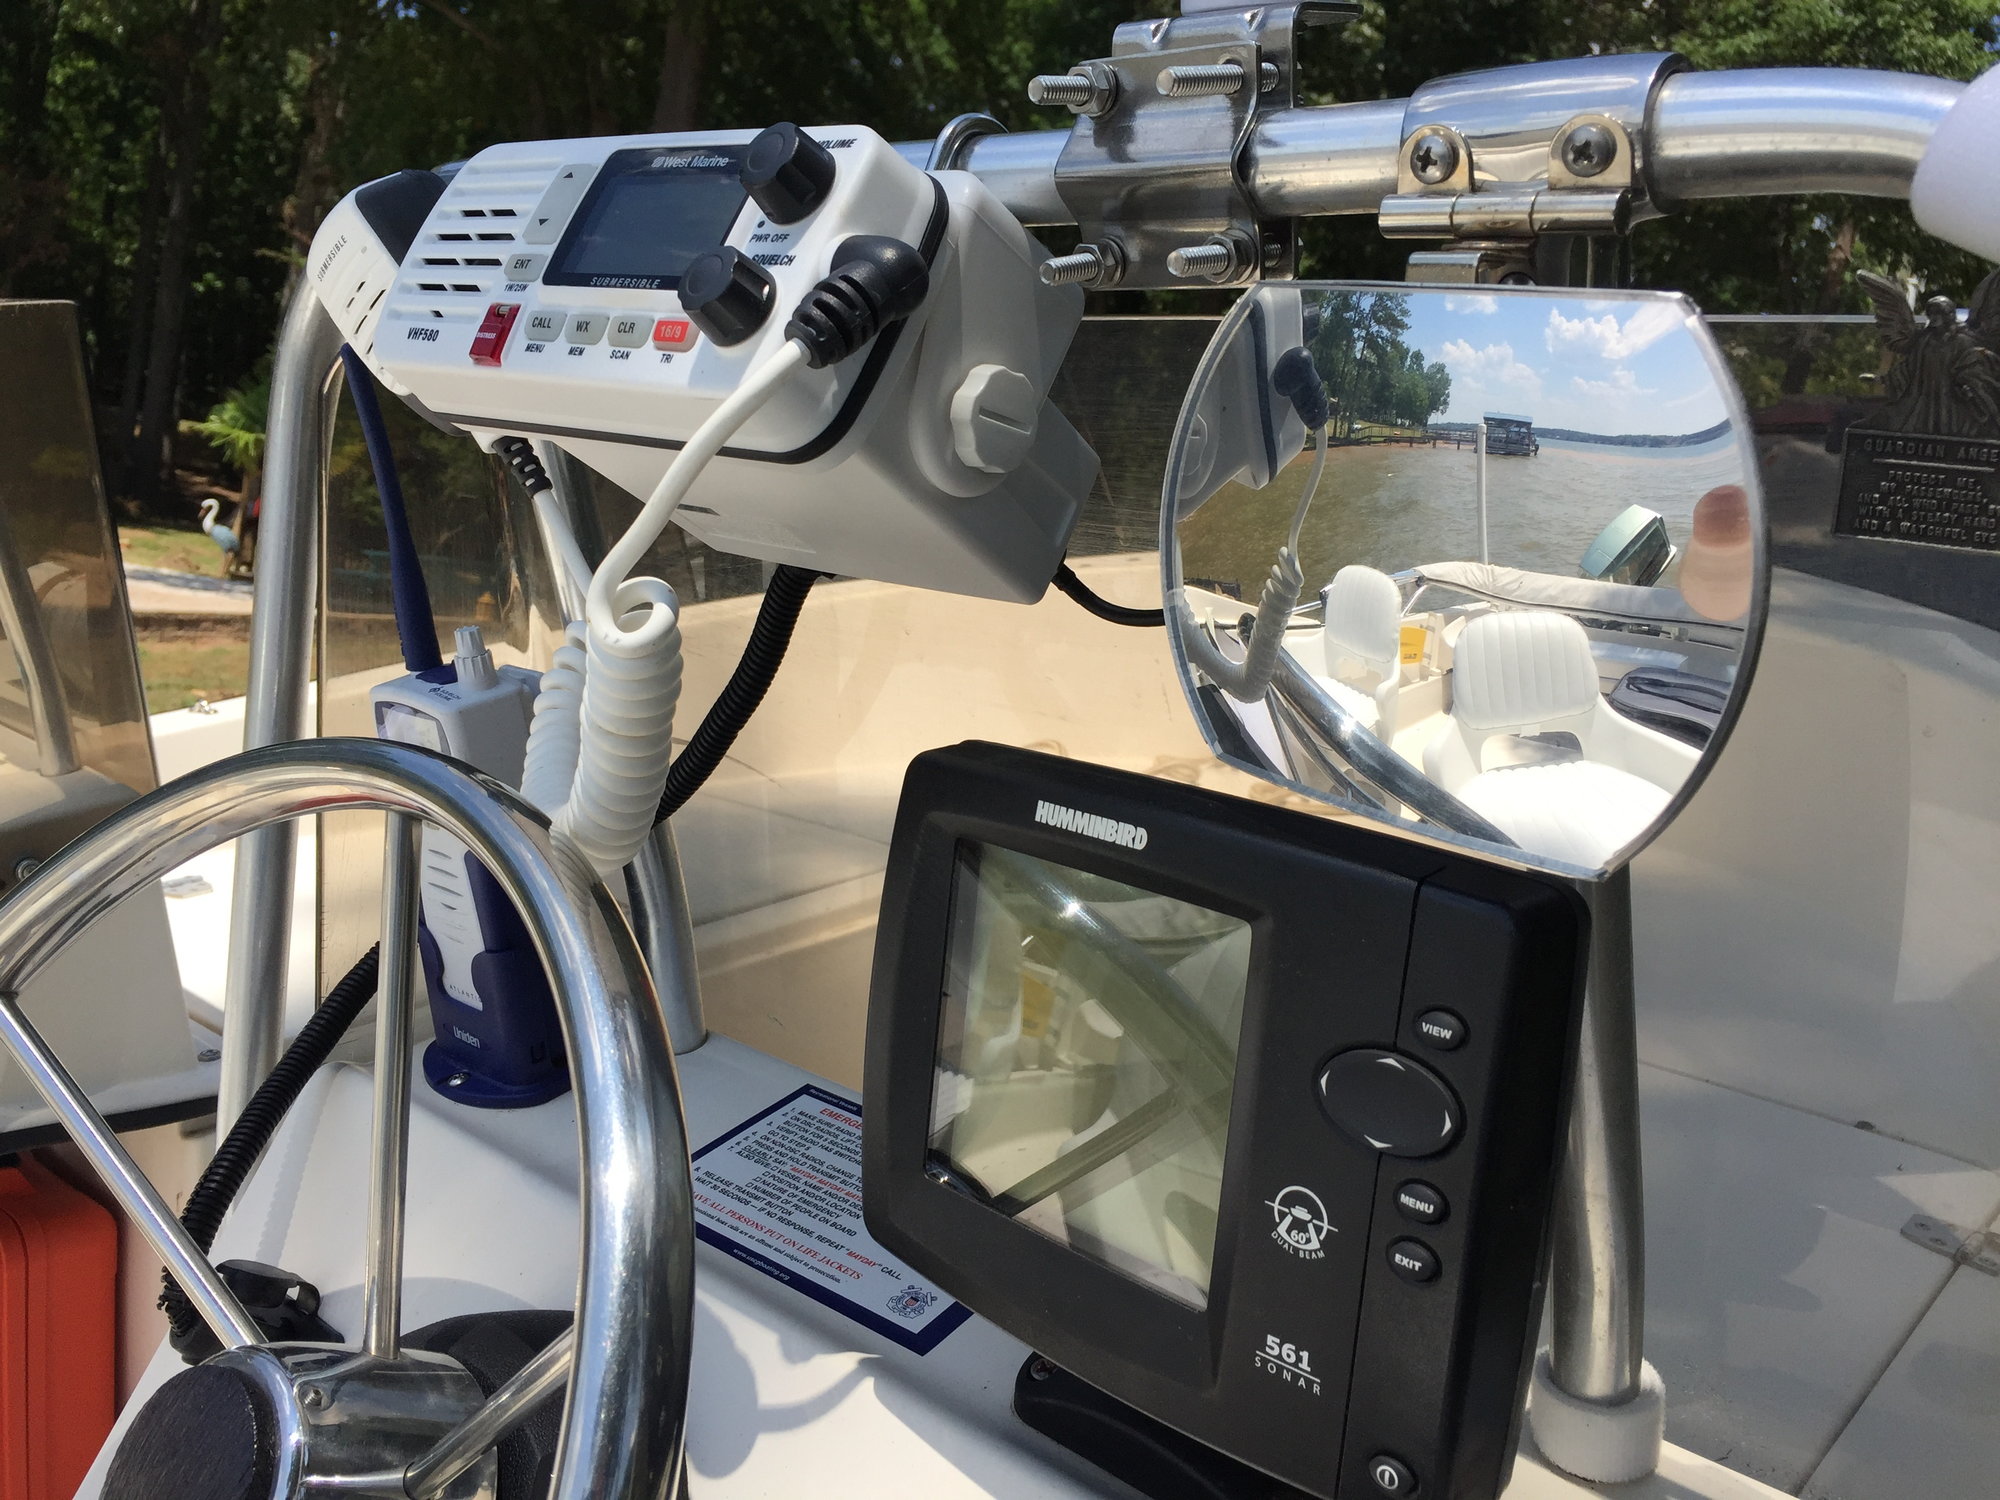 Rear view mirror repair question - The Hull Truth - Boating and Fishing  Forum